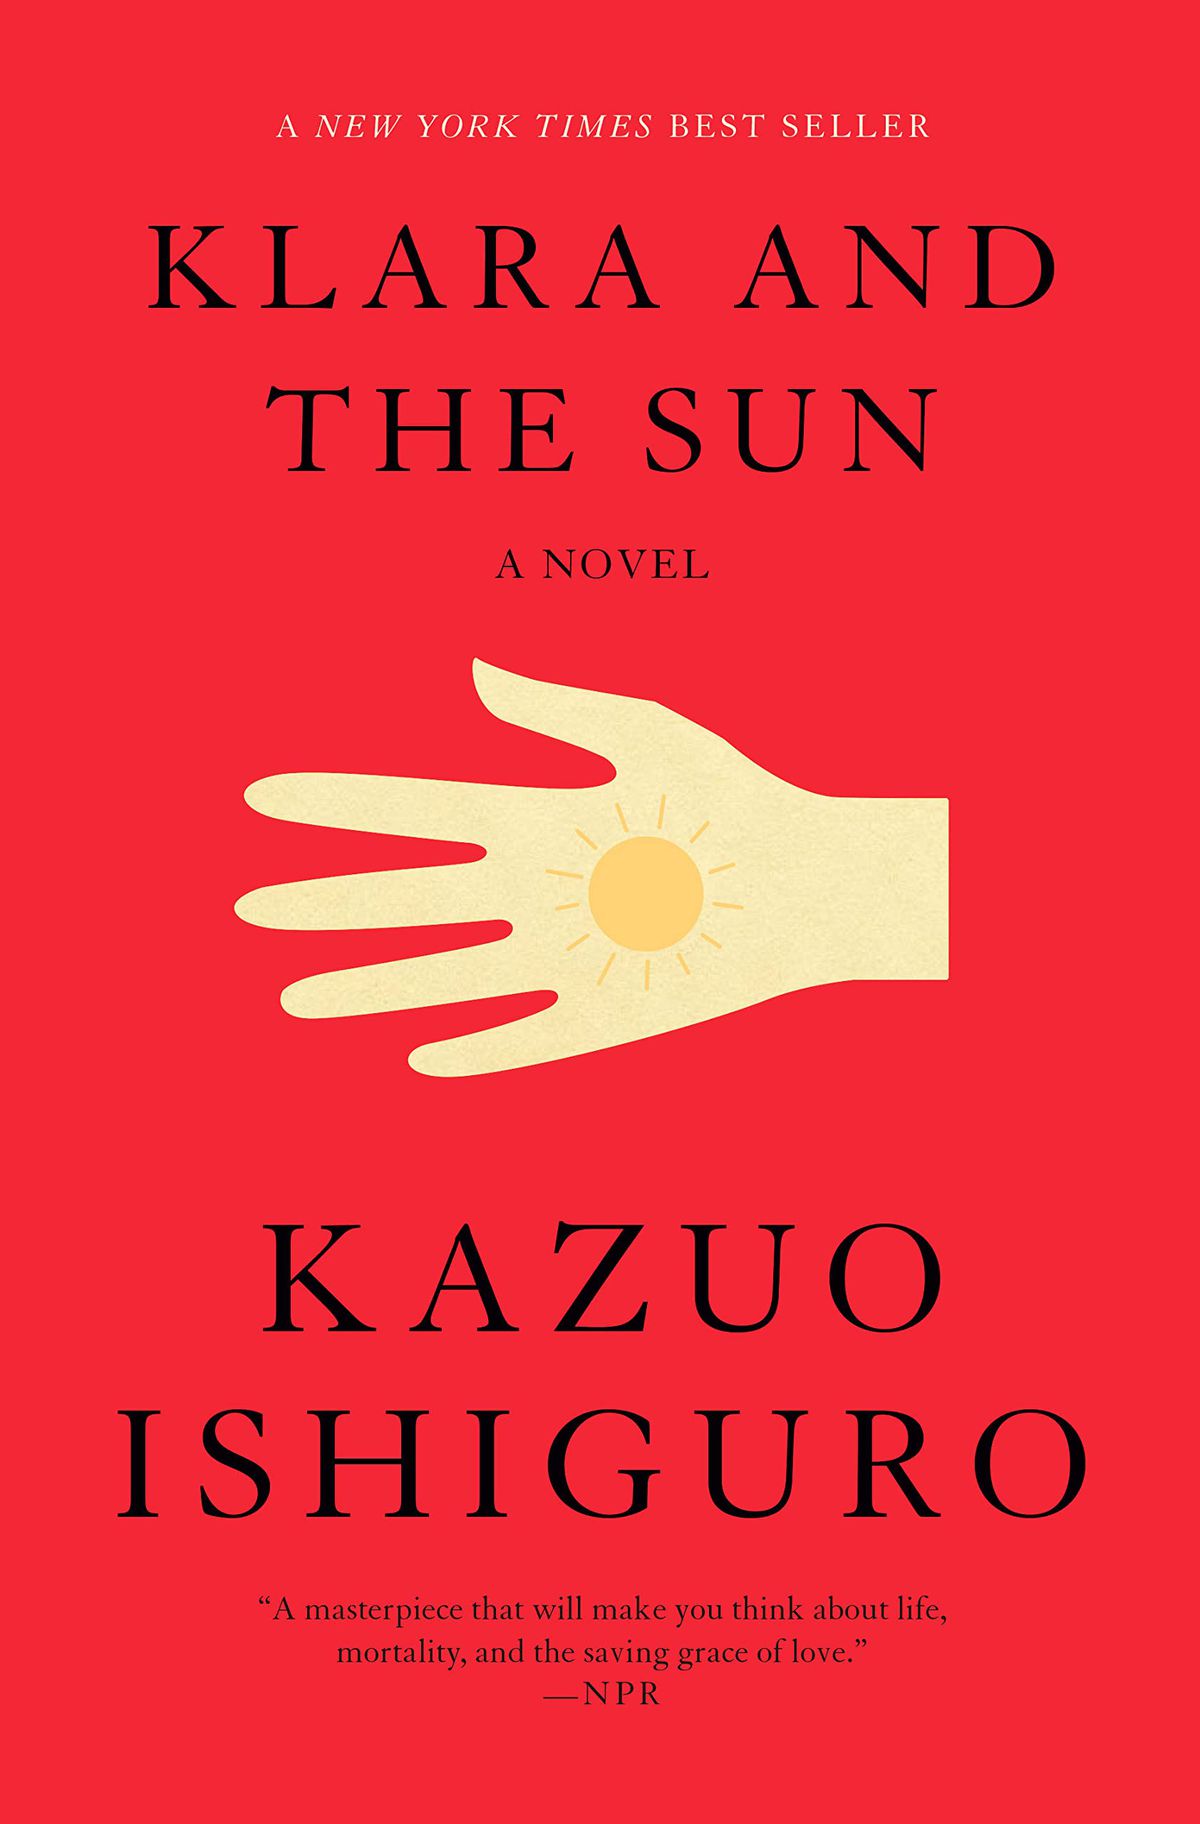 The cover for “Klara and the Sun” by Kazuo Ishiguro which shows a simplistic illustration of a hand with a sun in the middle